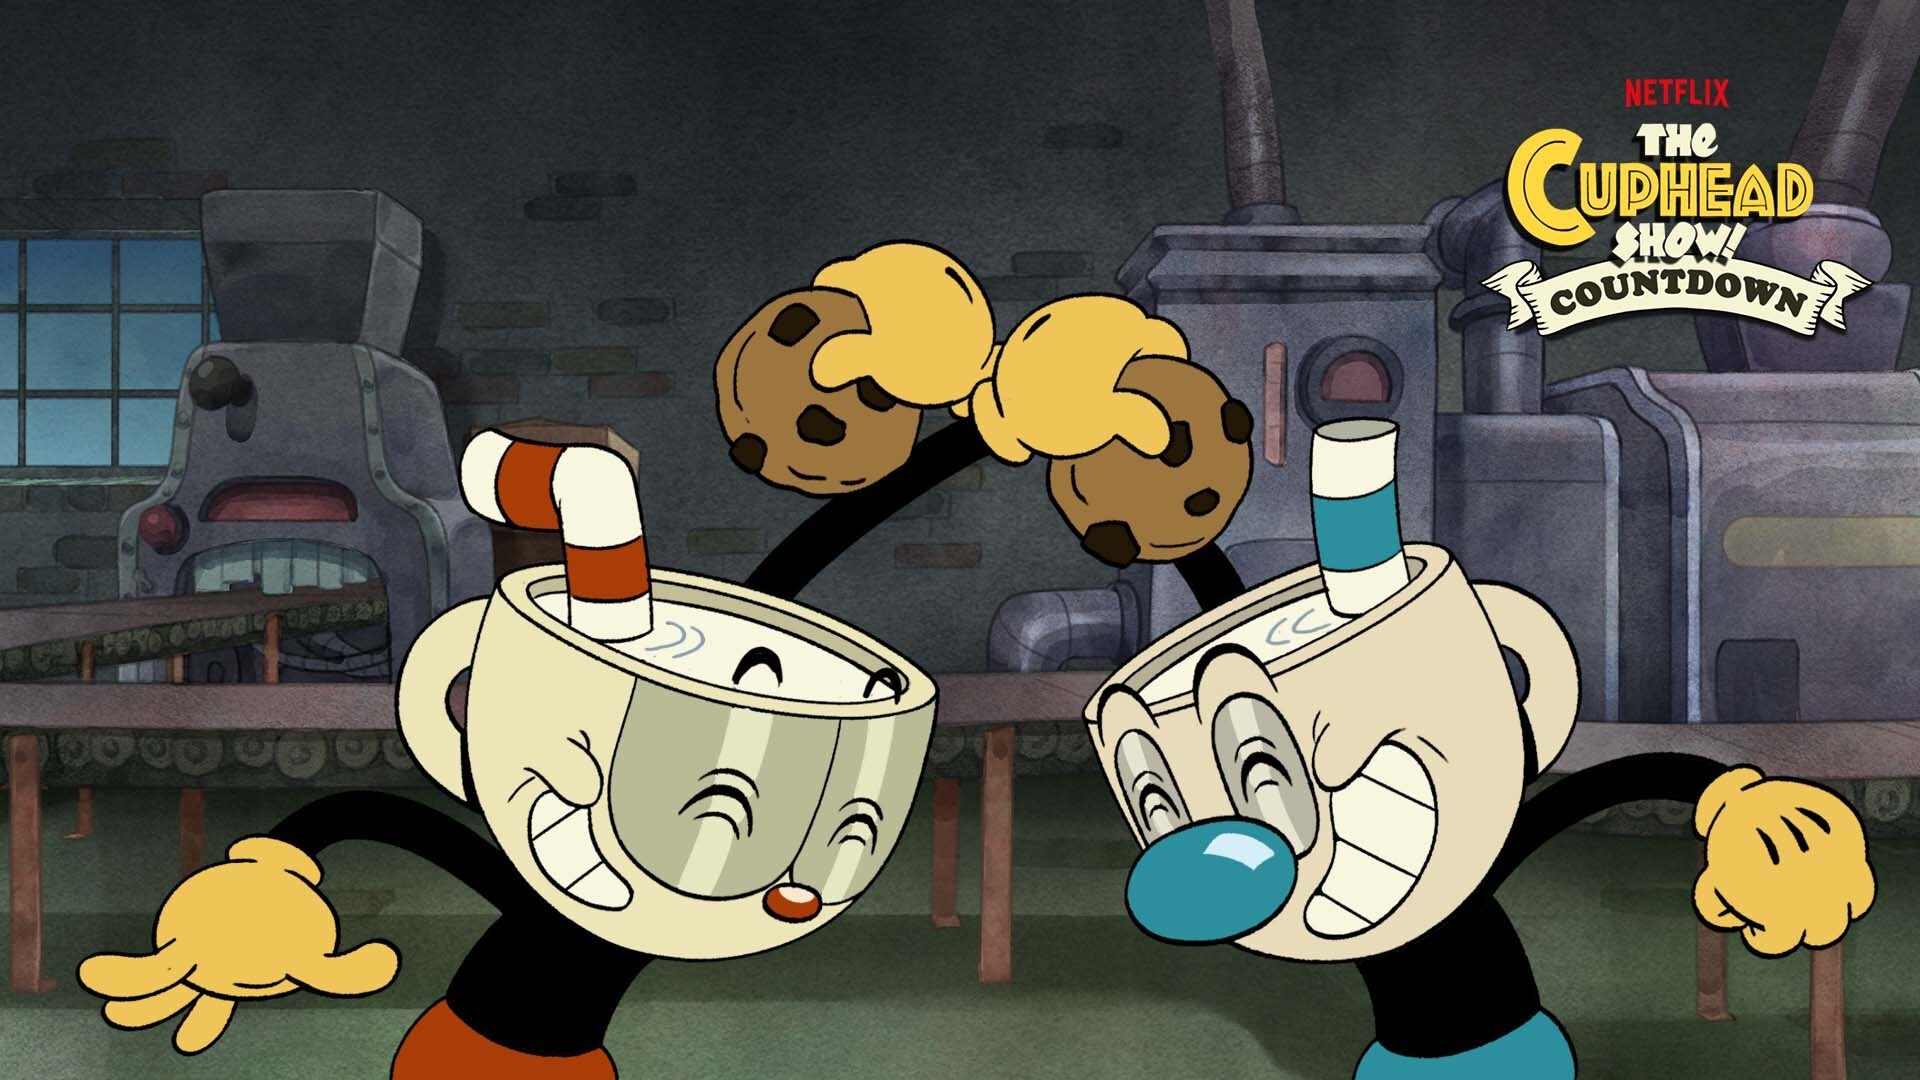 The Cuphead Show!, HD wallpapers, Animation, Backgrounds, 1920x1080 Full HD Desktop